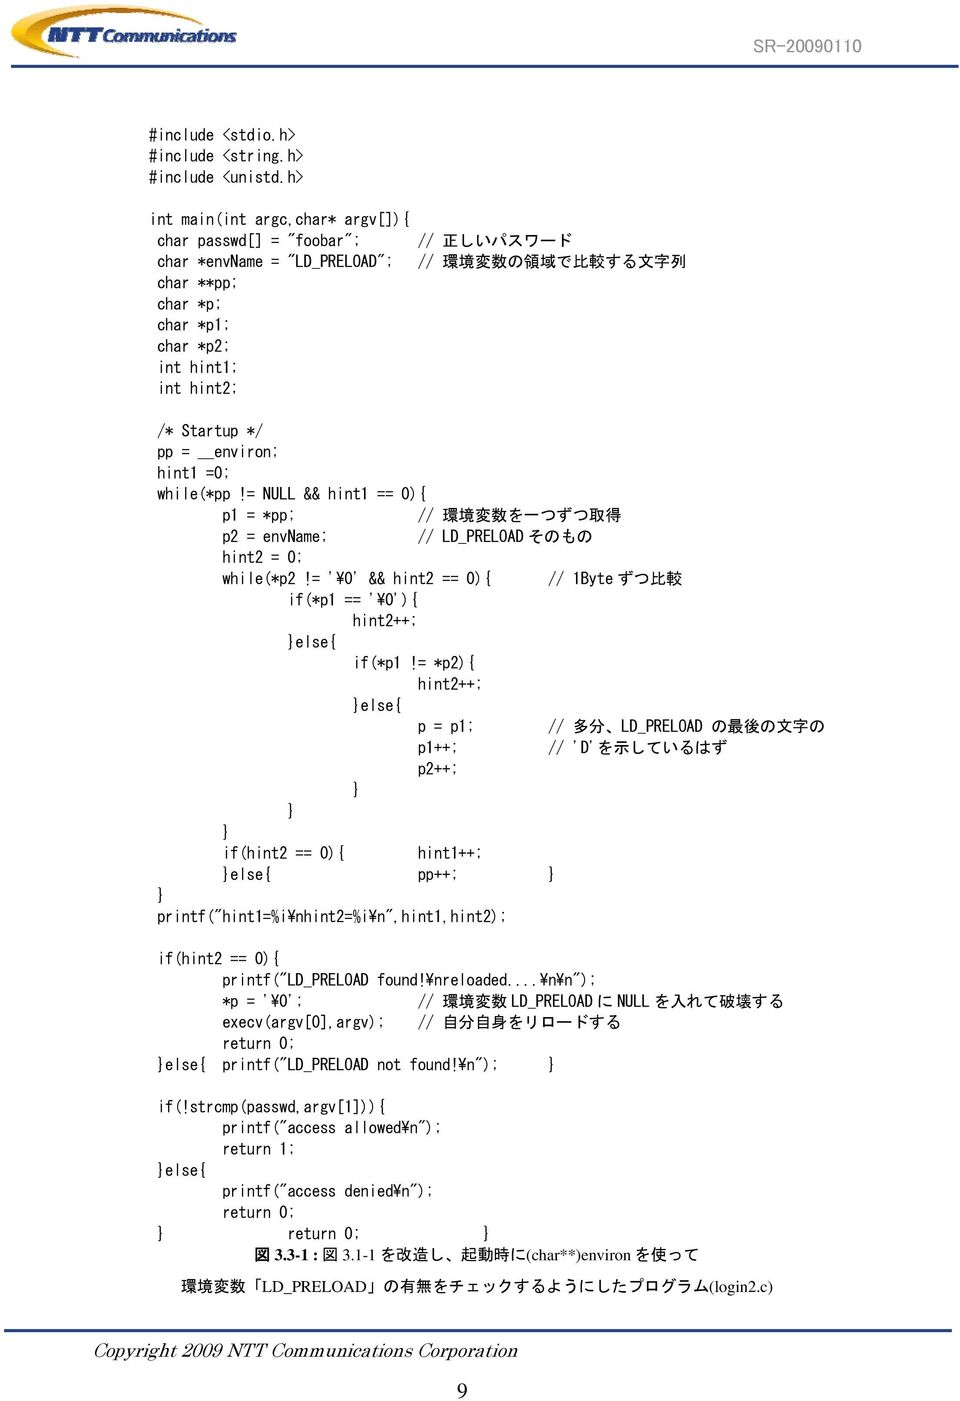 pp = environ; hint1 =0; while(*pp!= NULL && hint1 == 0){ p1 = *pp; // 環境変数を一つずつ取得 p2 = envname; // LD_PRELOAD そのもの hint2 = 0; while(*p2!